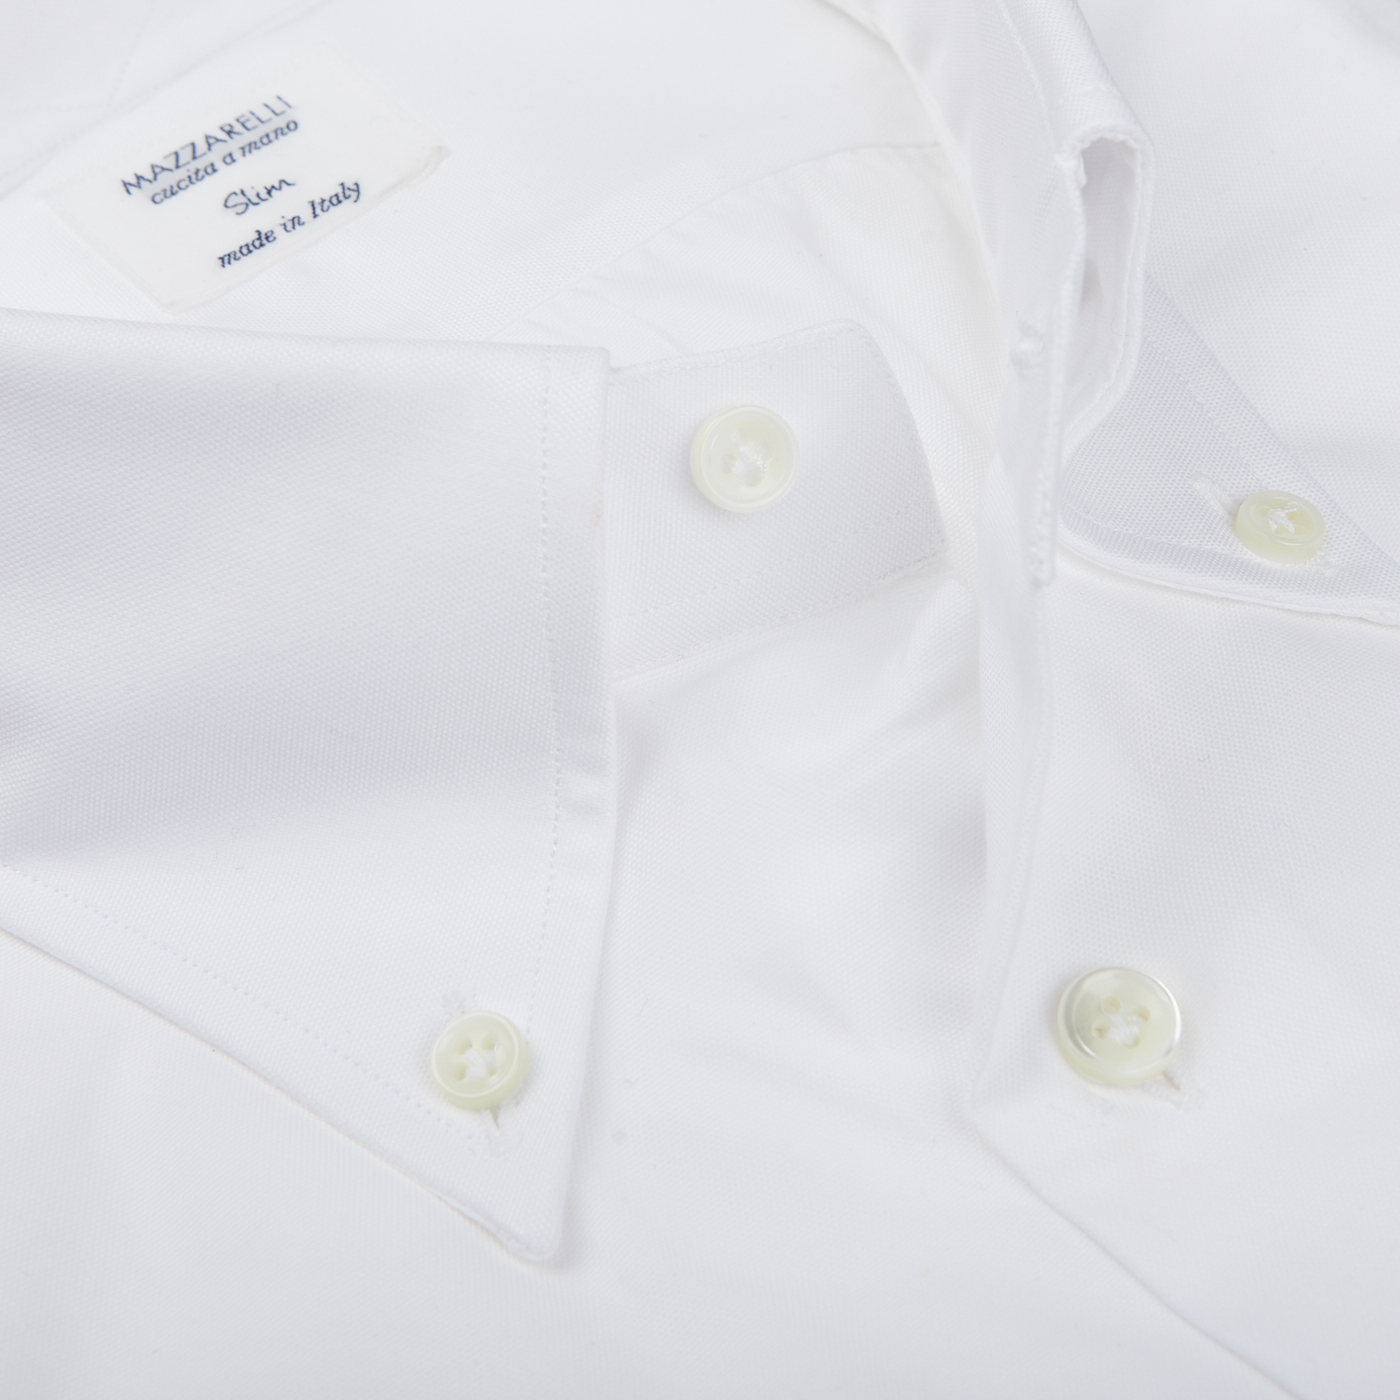 Close-up of a Mazzarelli White Royal Oxford BD Slim Shirt with a label reading "MAZZARELLI Classico, made in Italy" on the collar.